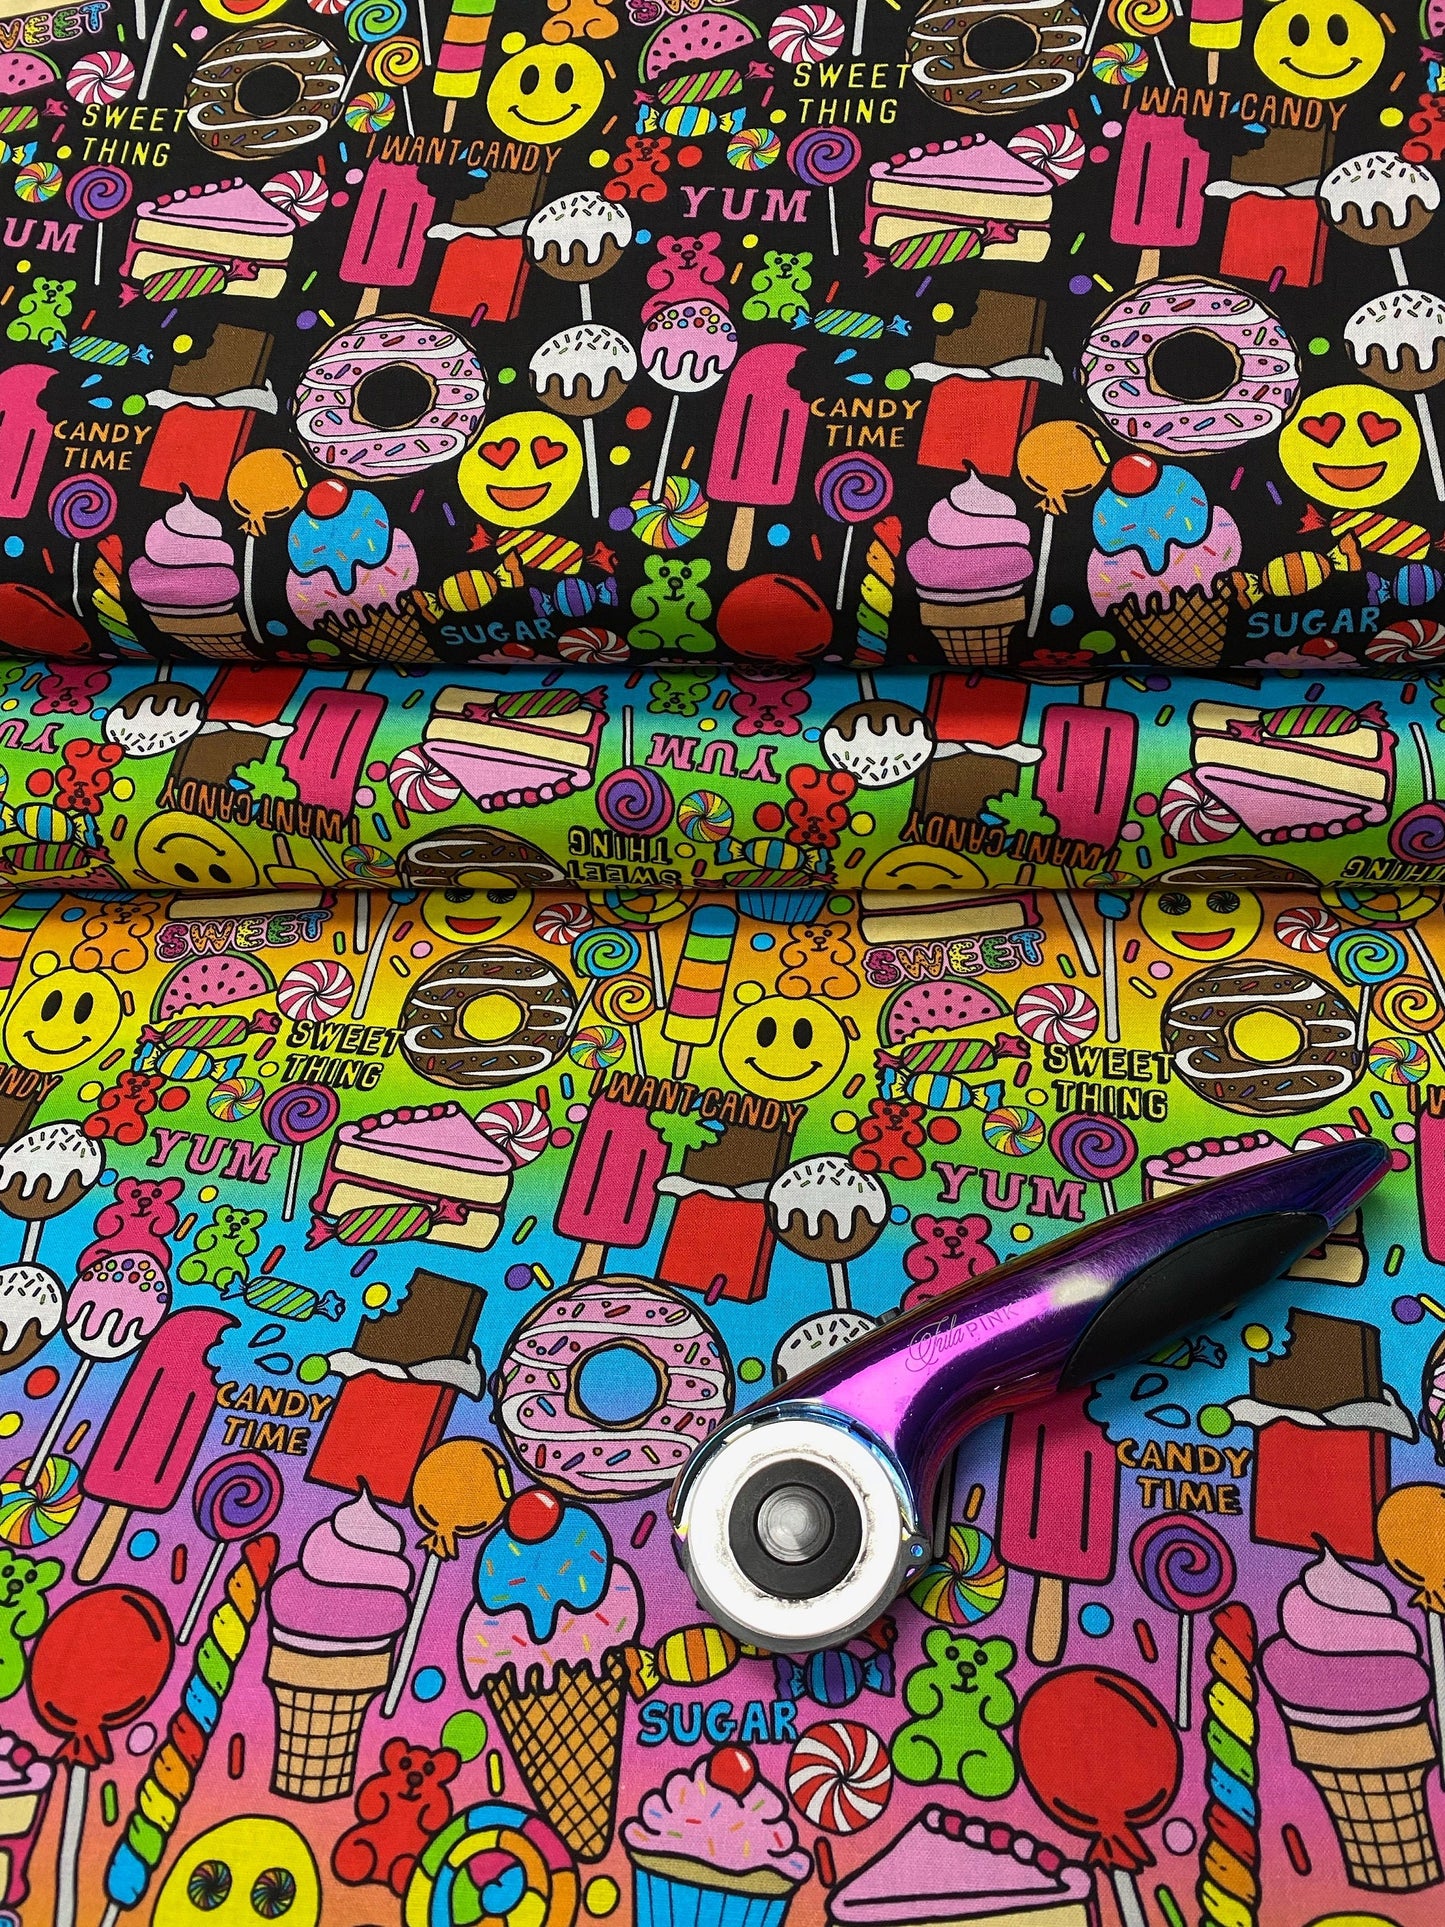 Design by Corey Paige I Want Candy Rainbow 10406-RAINBOW Cotton Woven Fabric